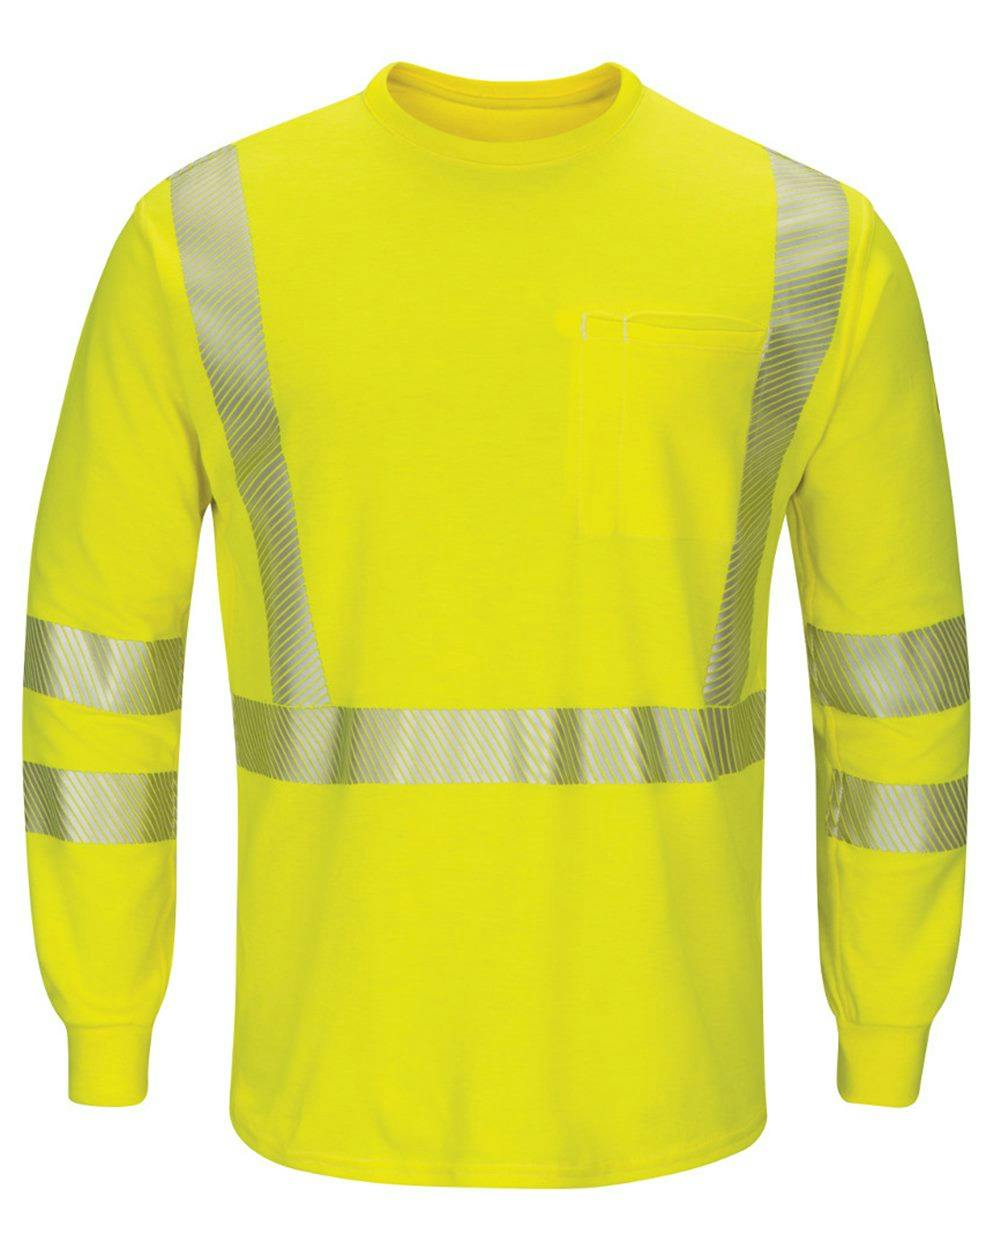 Image for Hi-Visibility Lightweight Long Sleeve T-Shirt - Long Sizes - SMK8L